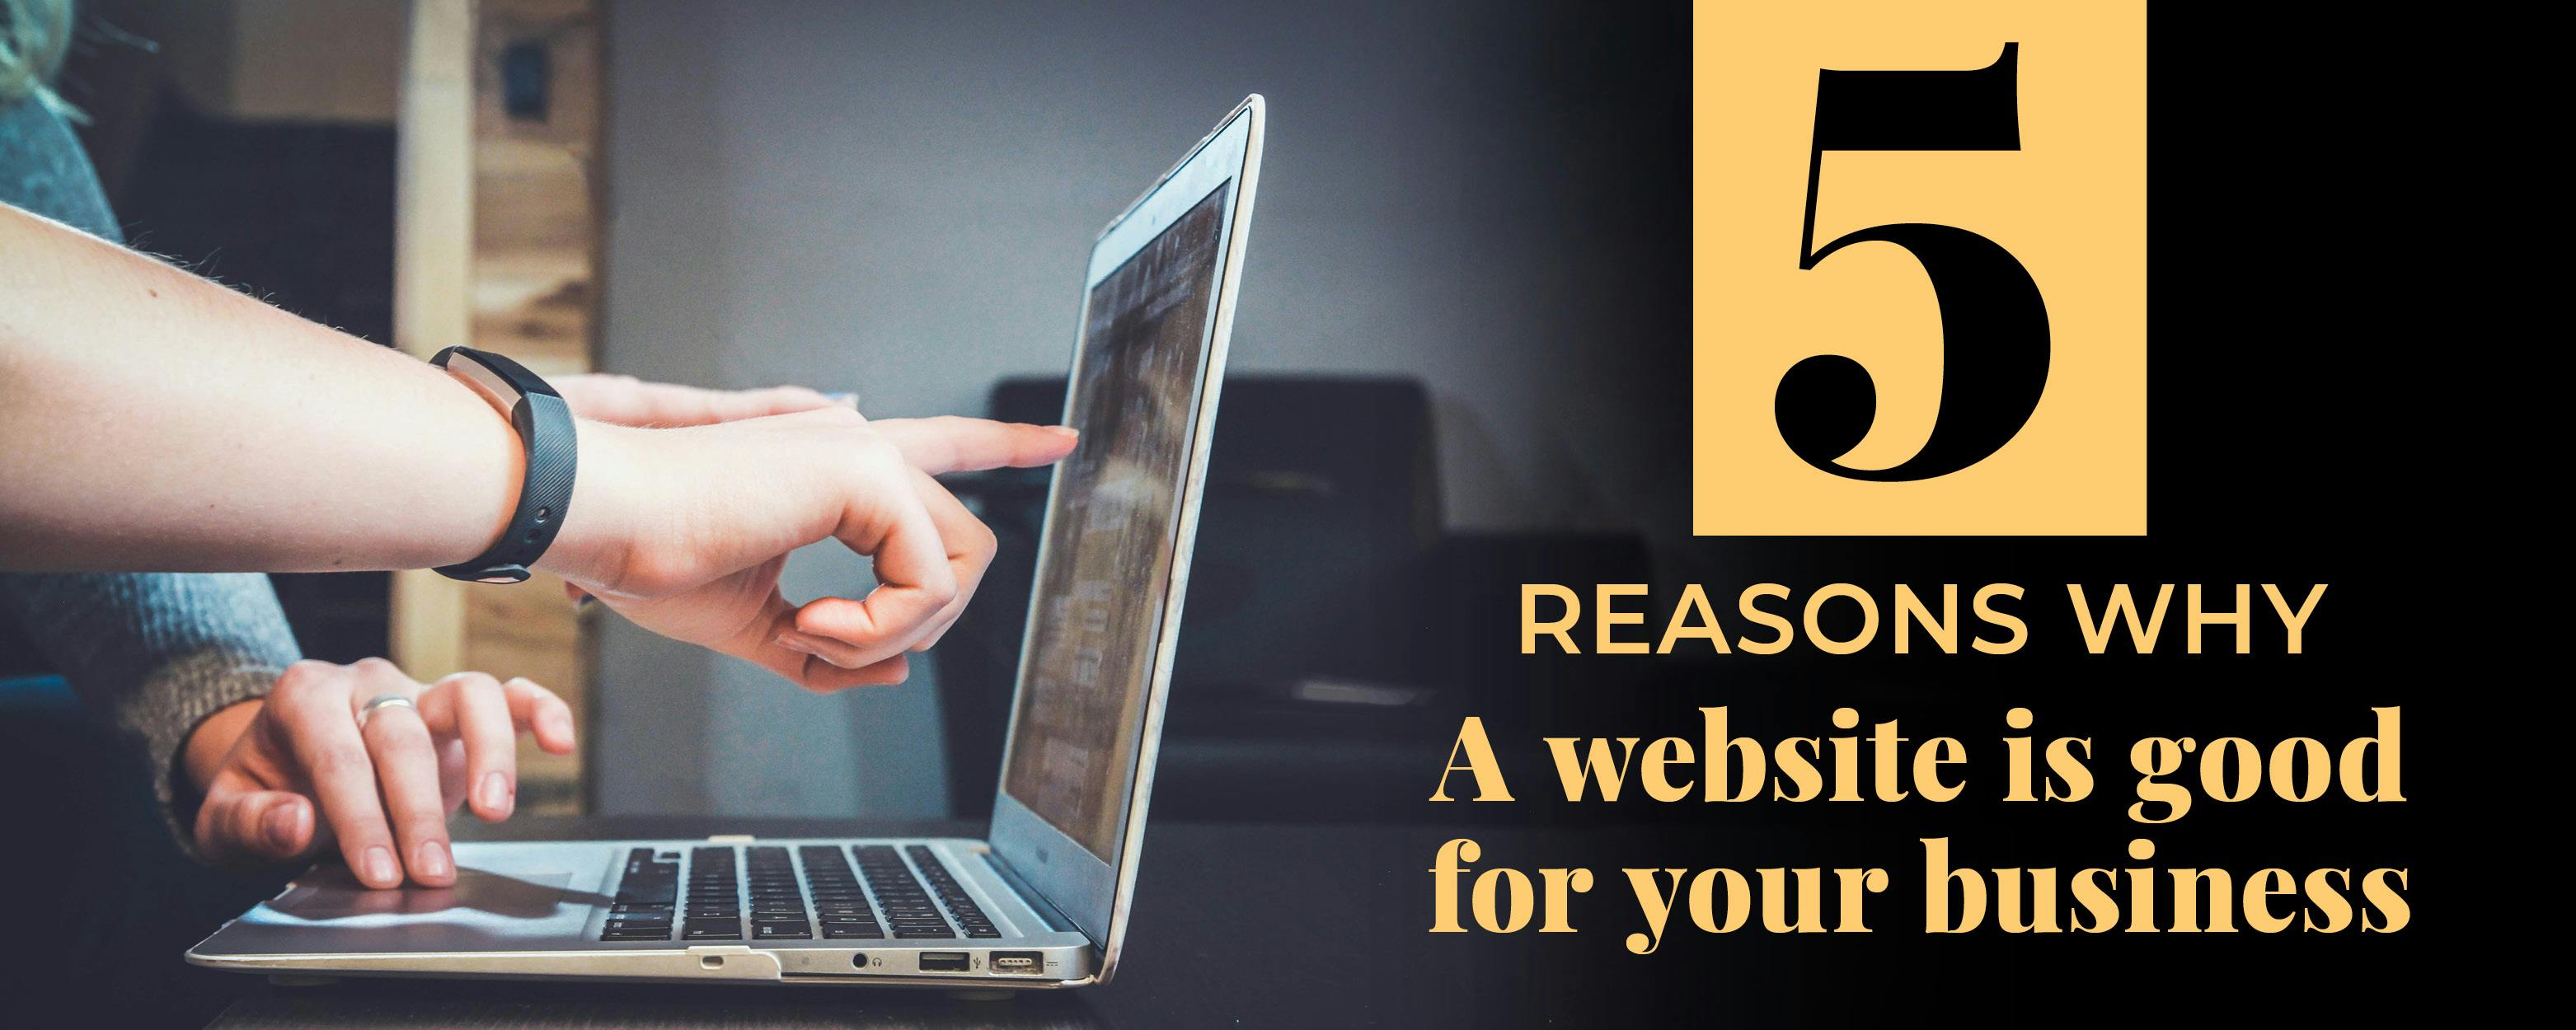 5 reasons why a website is good for your business